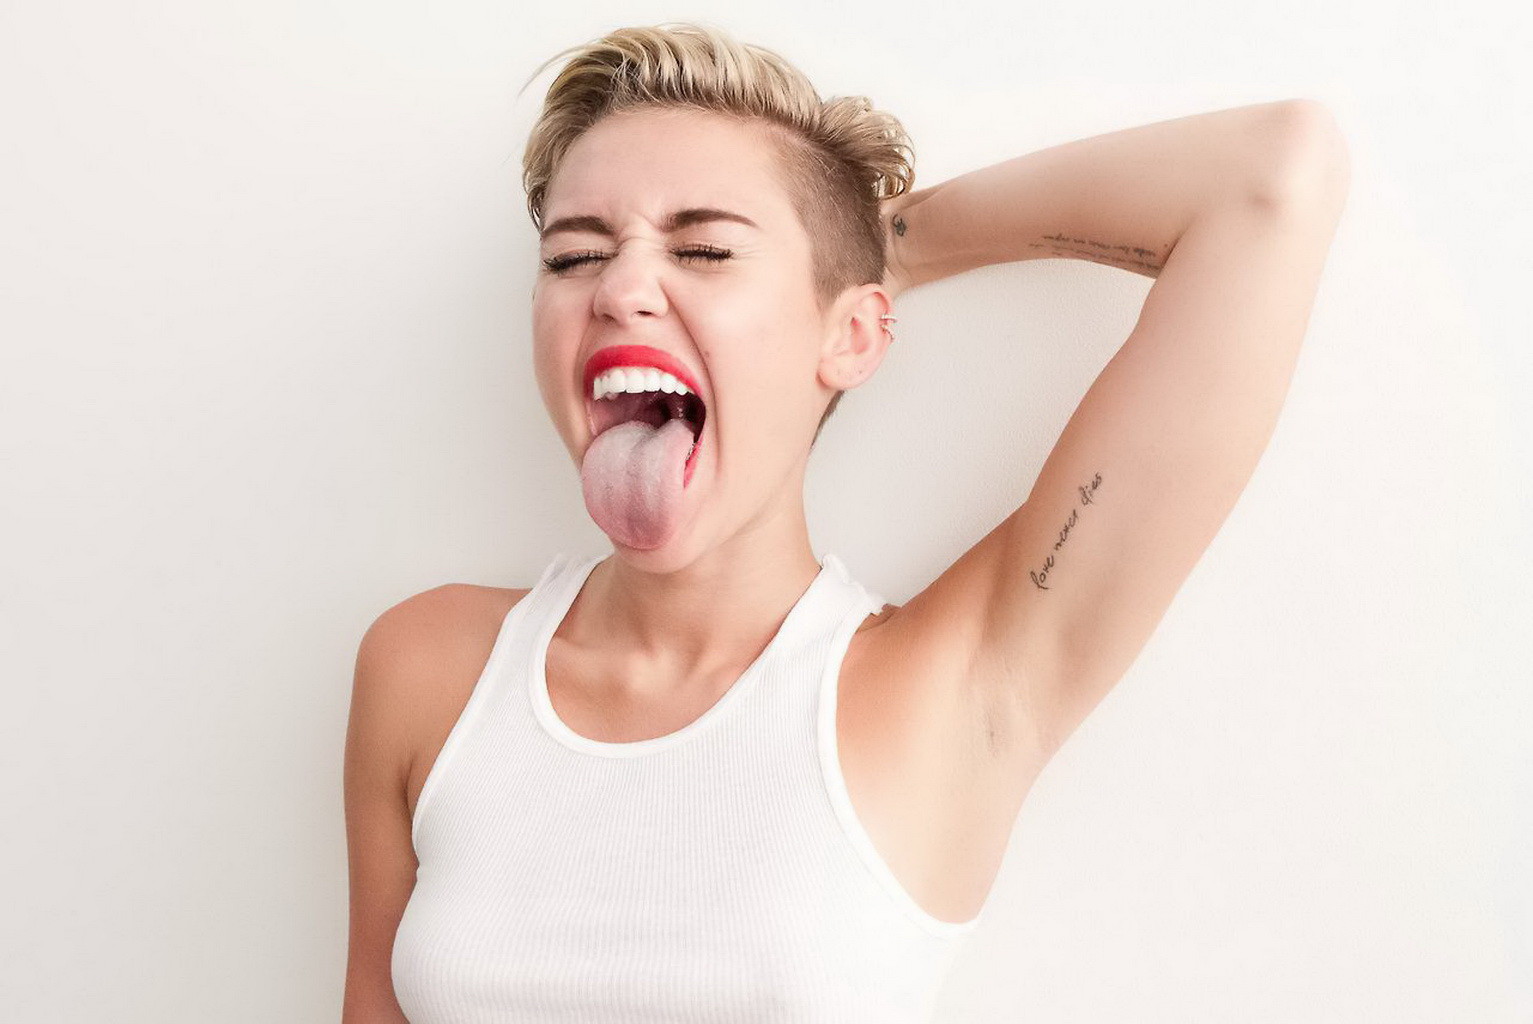 Miley Cyrus shows off her fully naked body while filming Wrecking Ball music vid #75219435